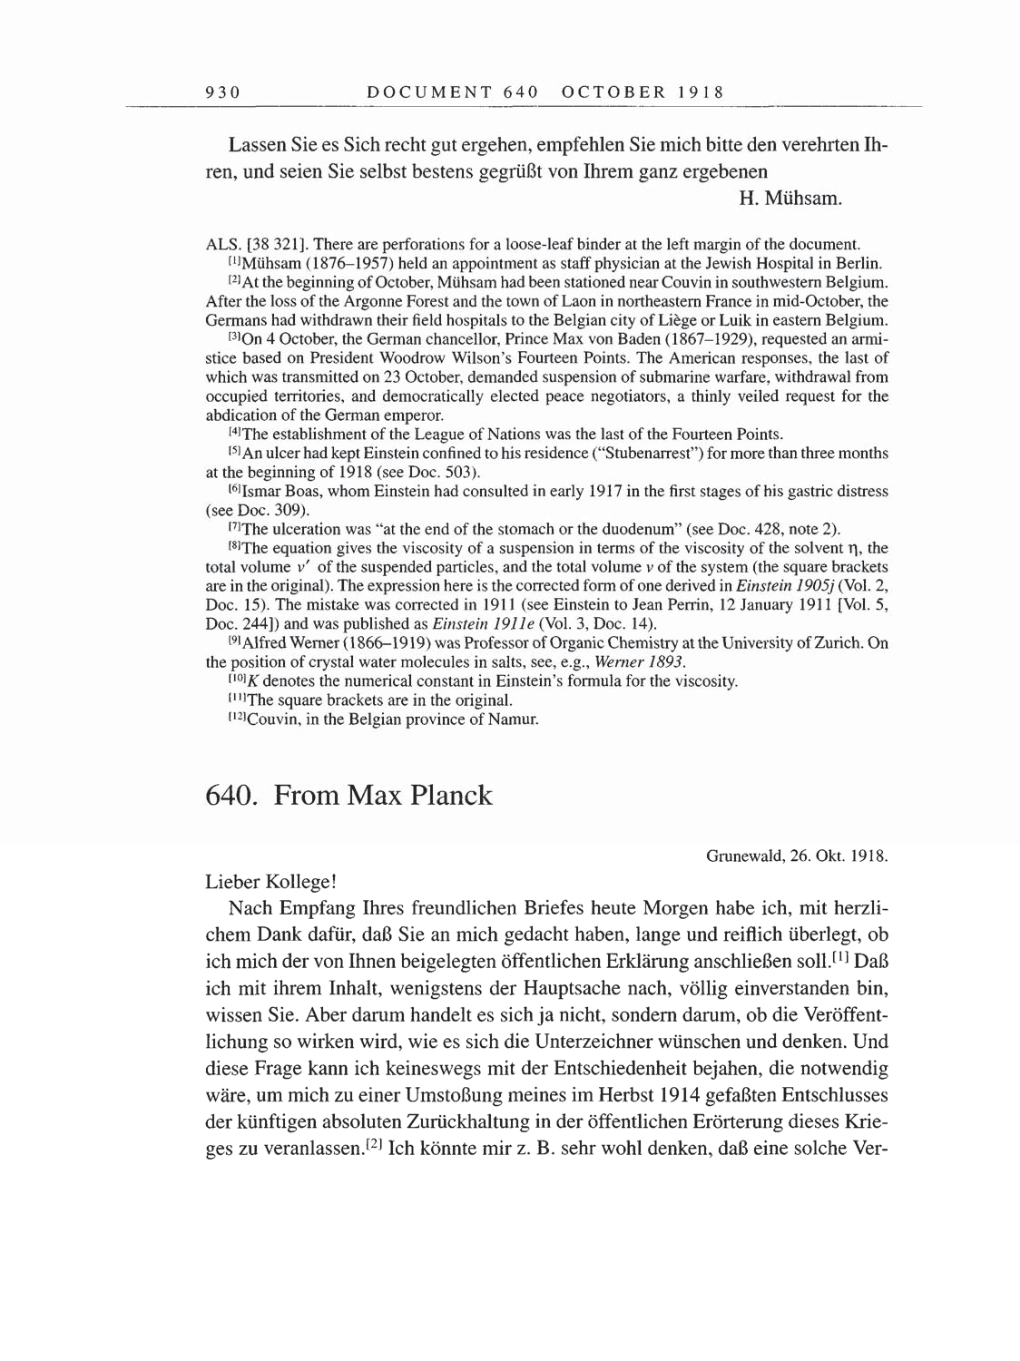 Volume 8, Part B: The Berlin Years: Correspondence 1918 page 930